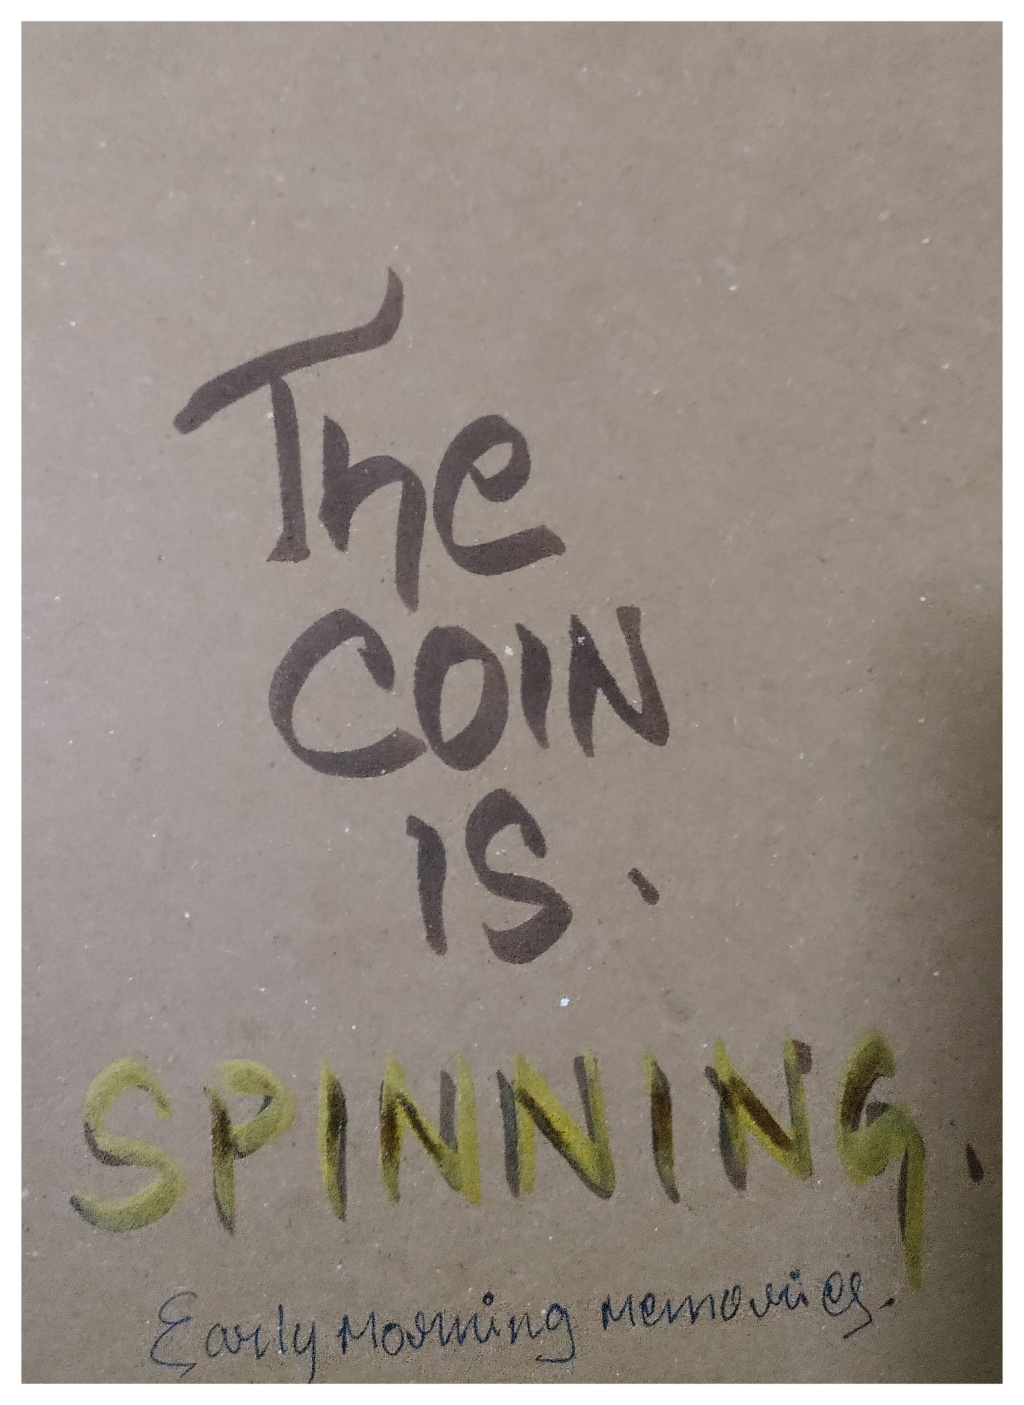 The Coin is Spinning